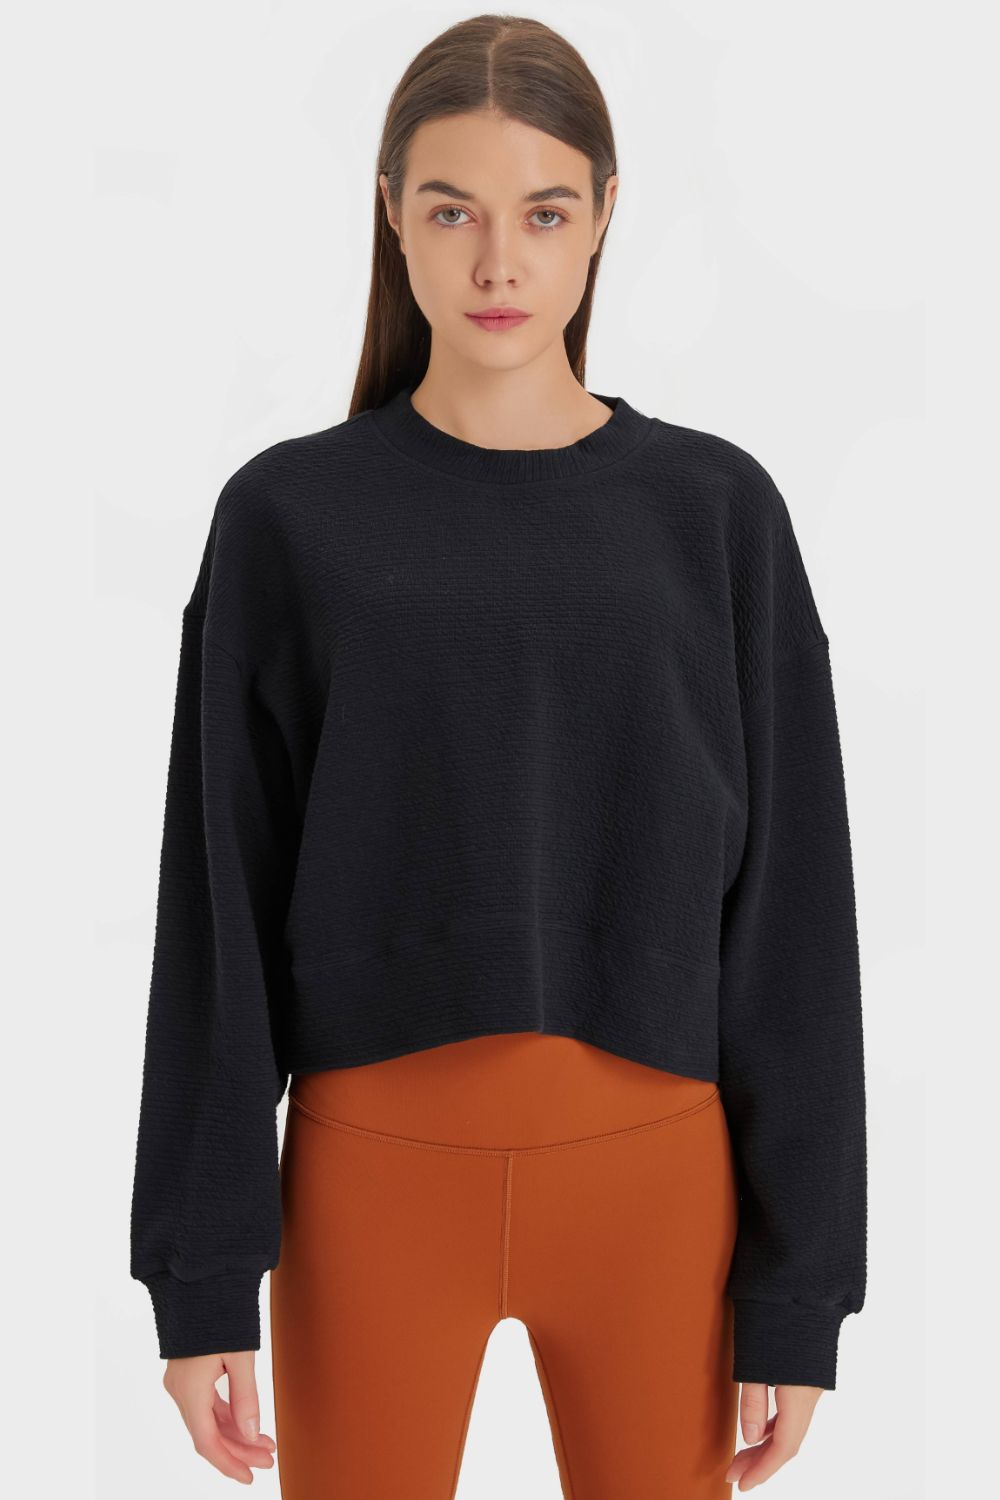 Textured Dropped Shoulder Sports Top - Groove Rabbit